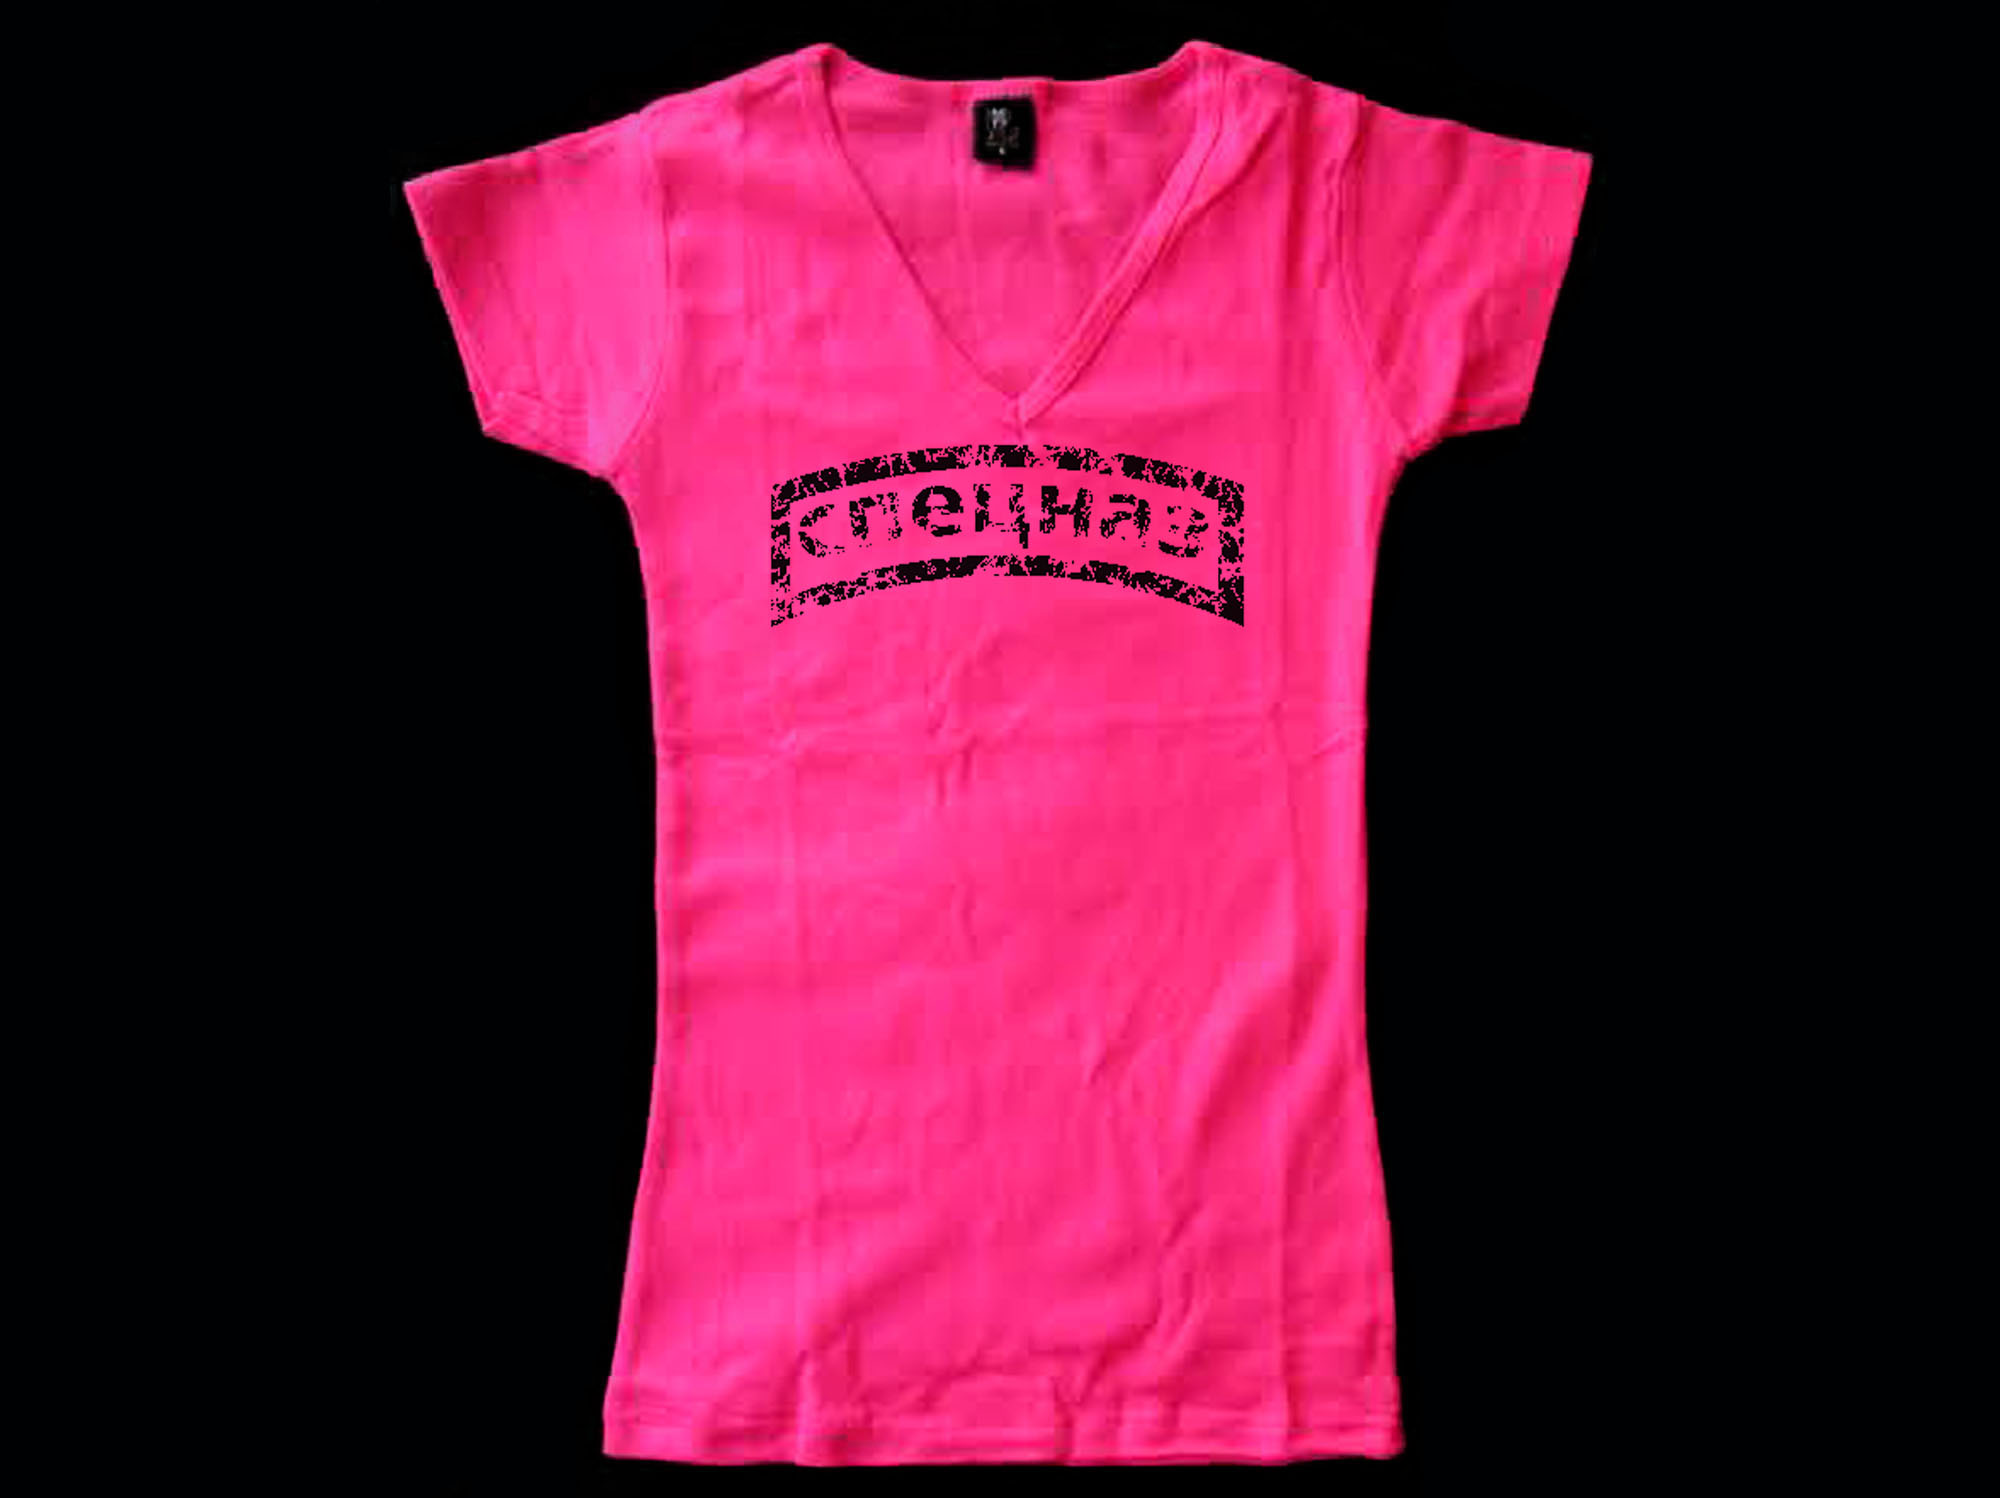 Russian special operations group spetsnaz spetnas ladies junior pink tee shirt